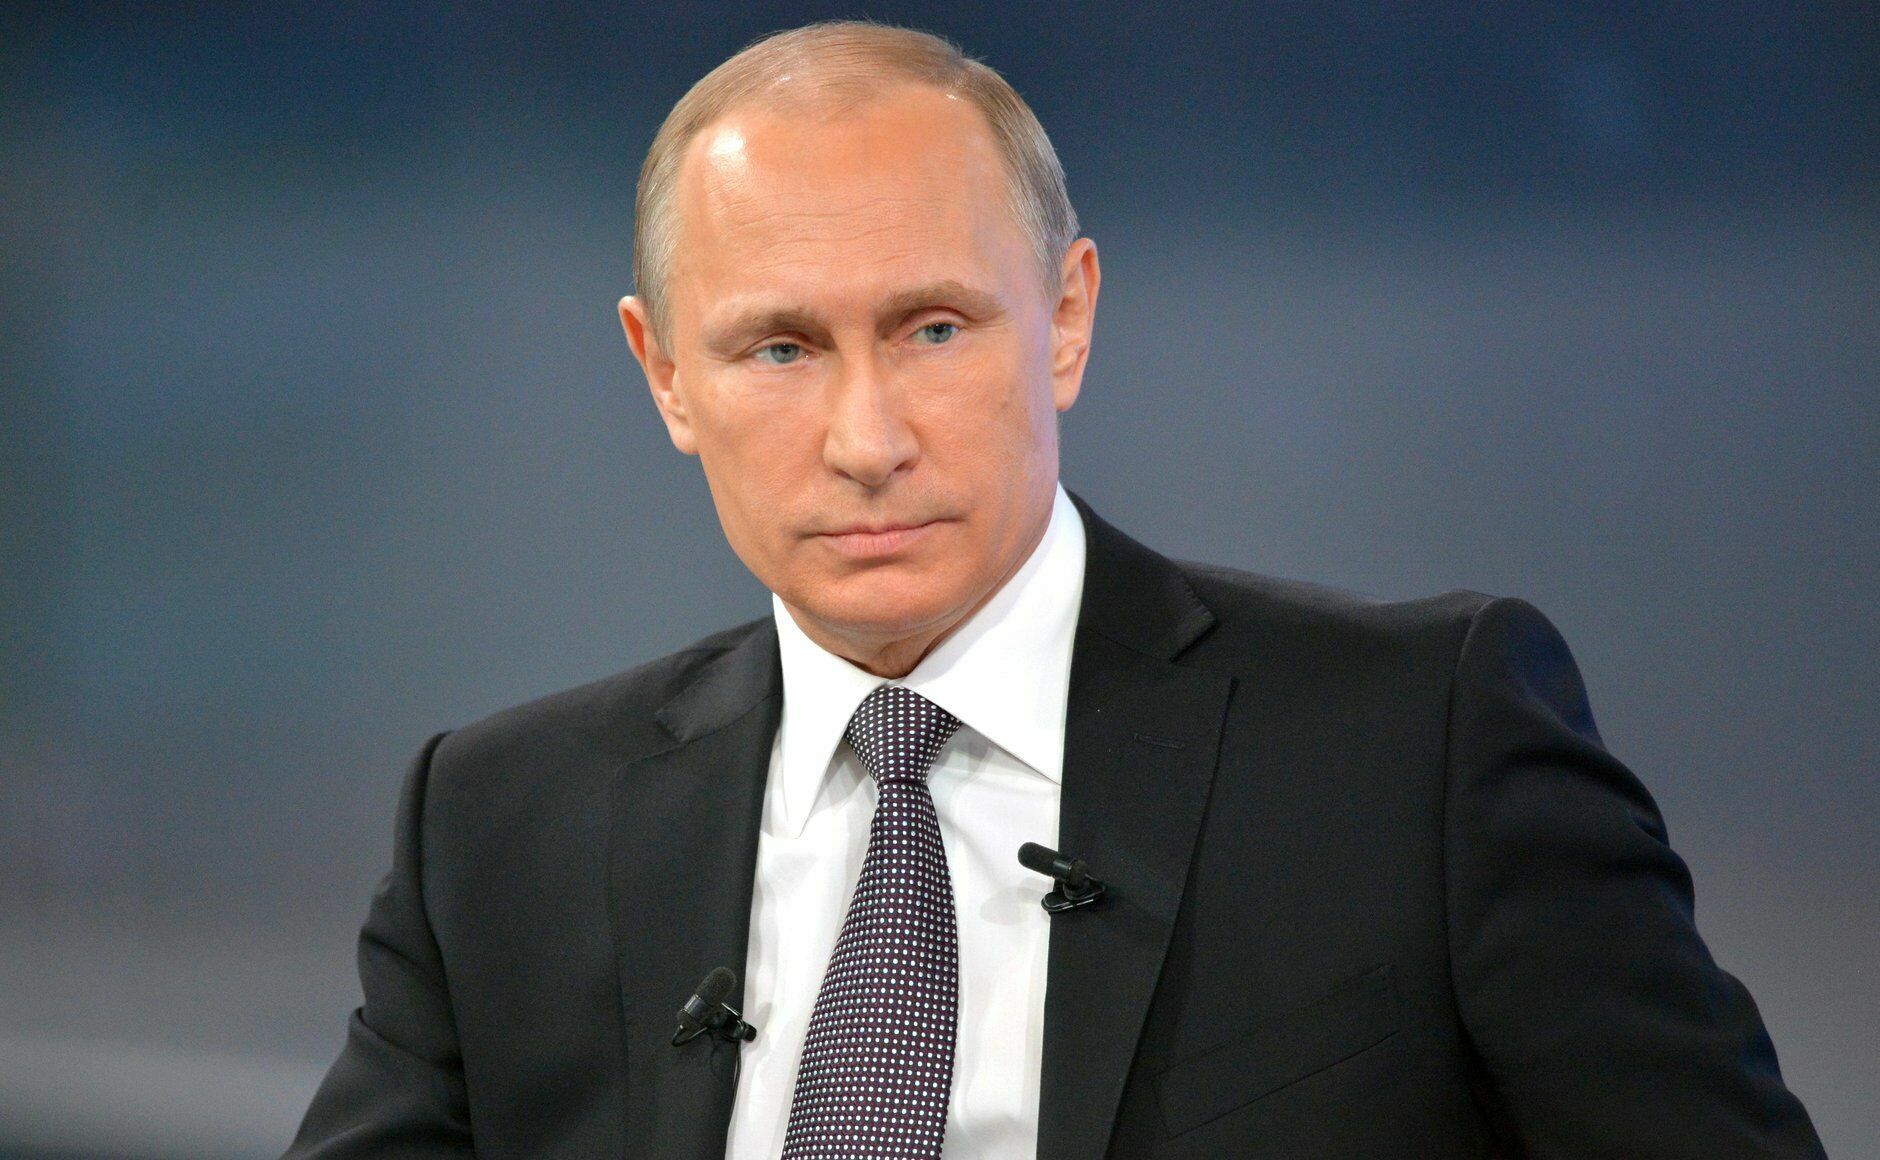 Putin formed a reserve of security officials to help Lukashenko